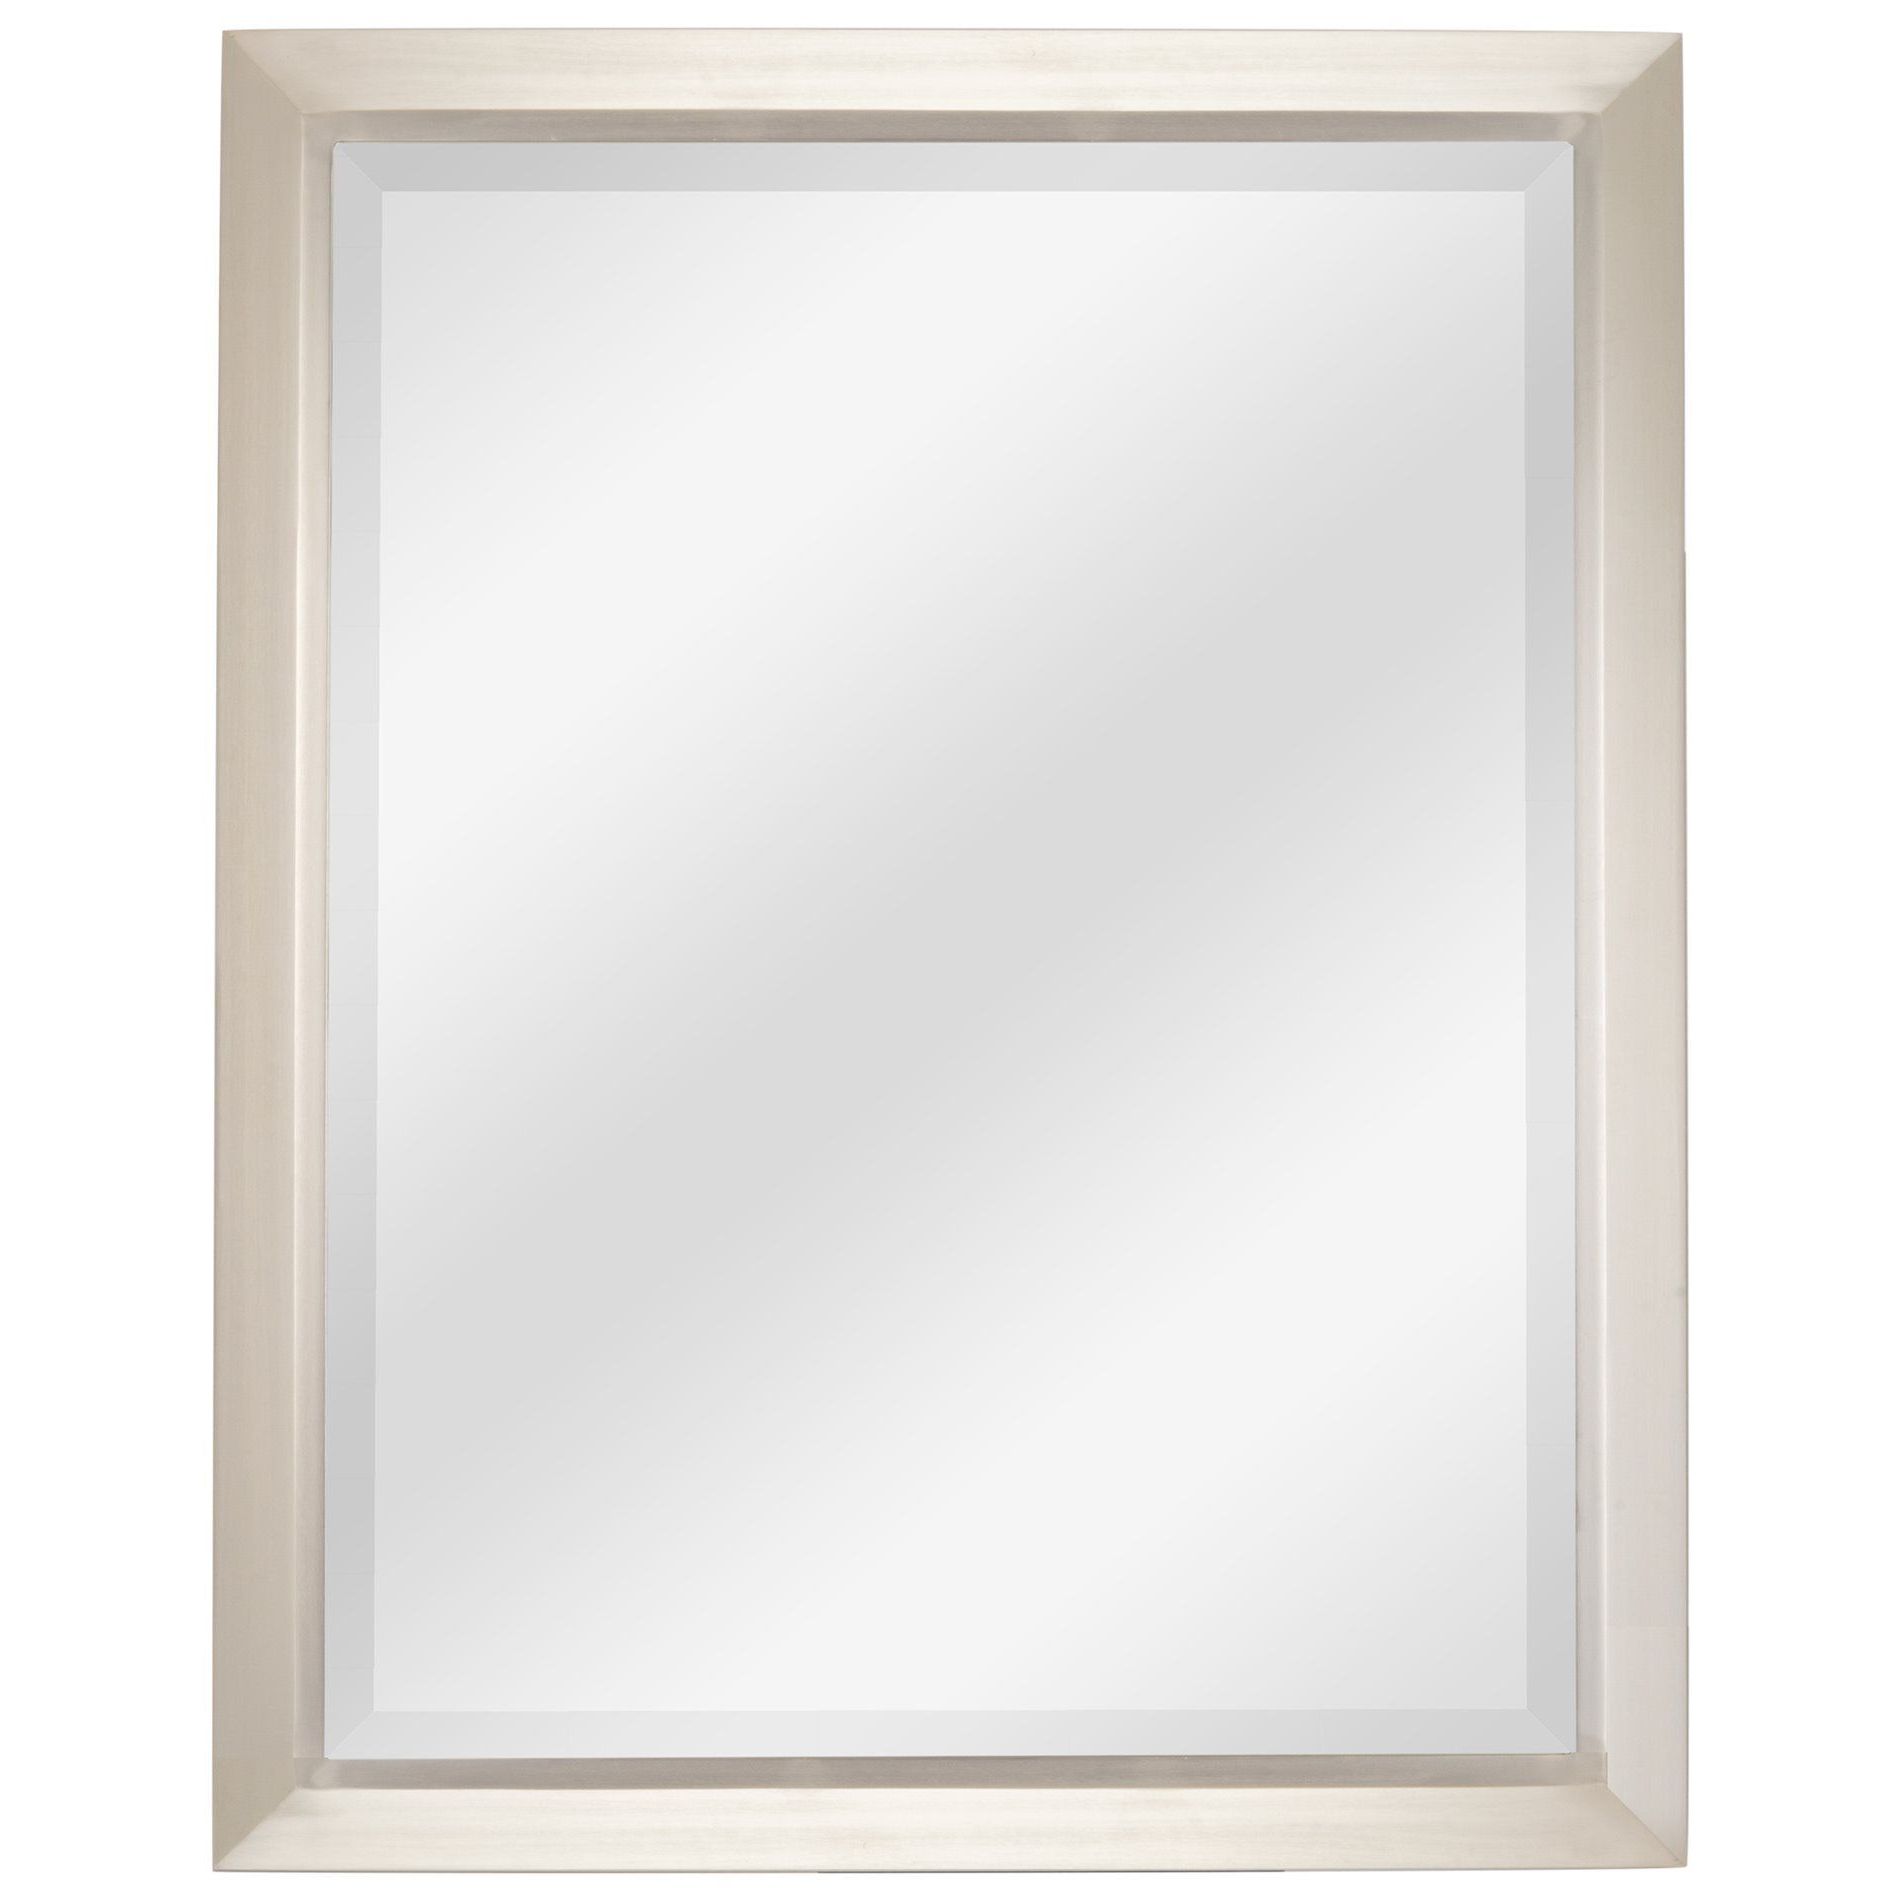 Favorite Brushed Nickel Wall Mirrors For Bathroom With Regard To Revel Madison 30" Large Decorative Bathroom Wall Mirror + Brushed (View 15 of 20)